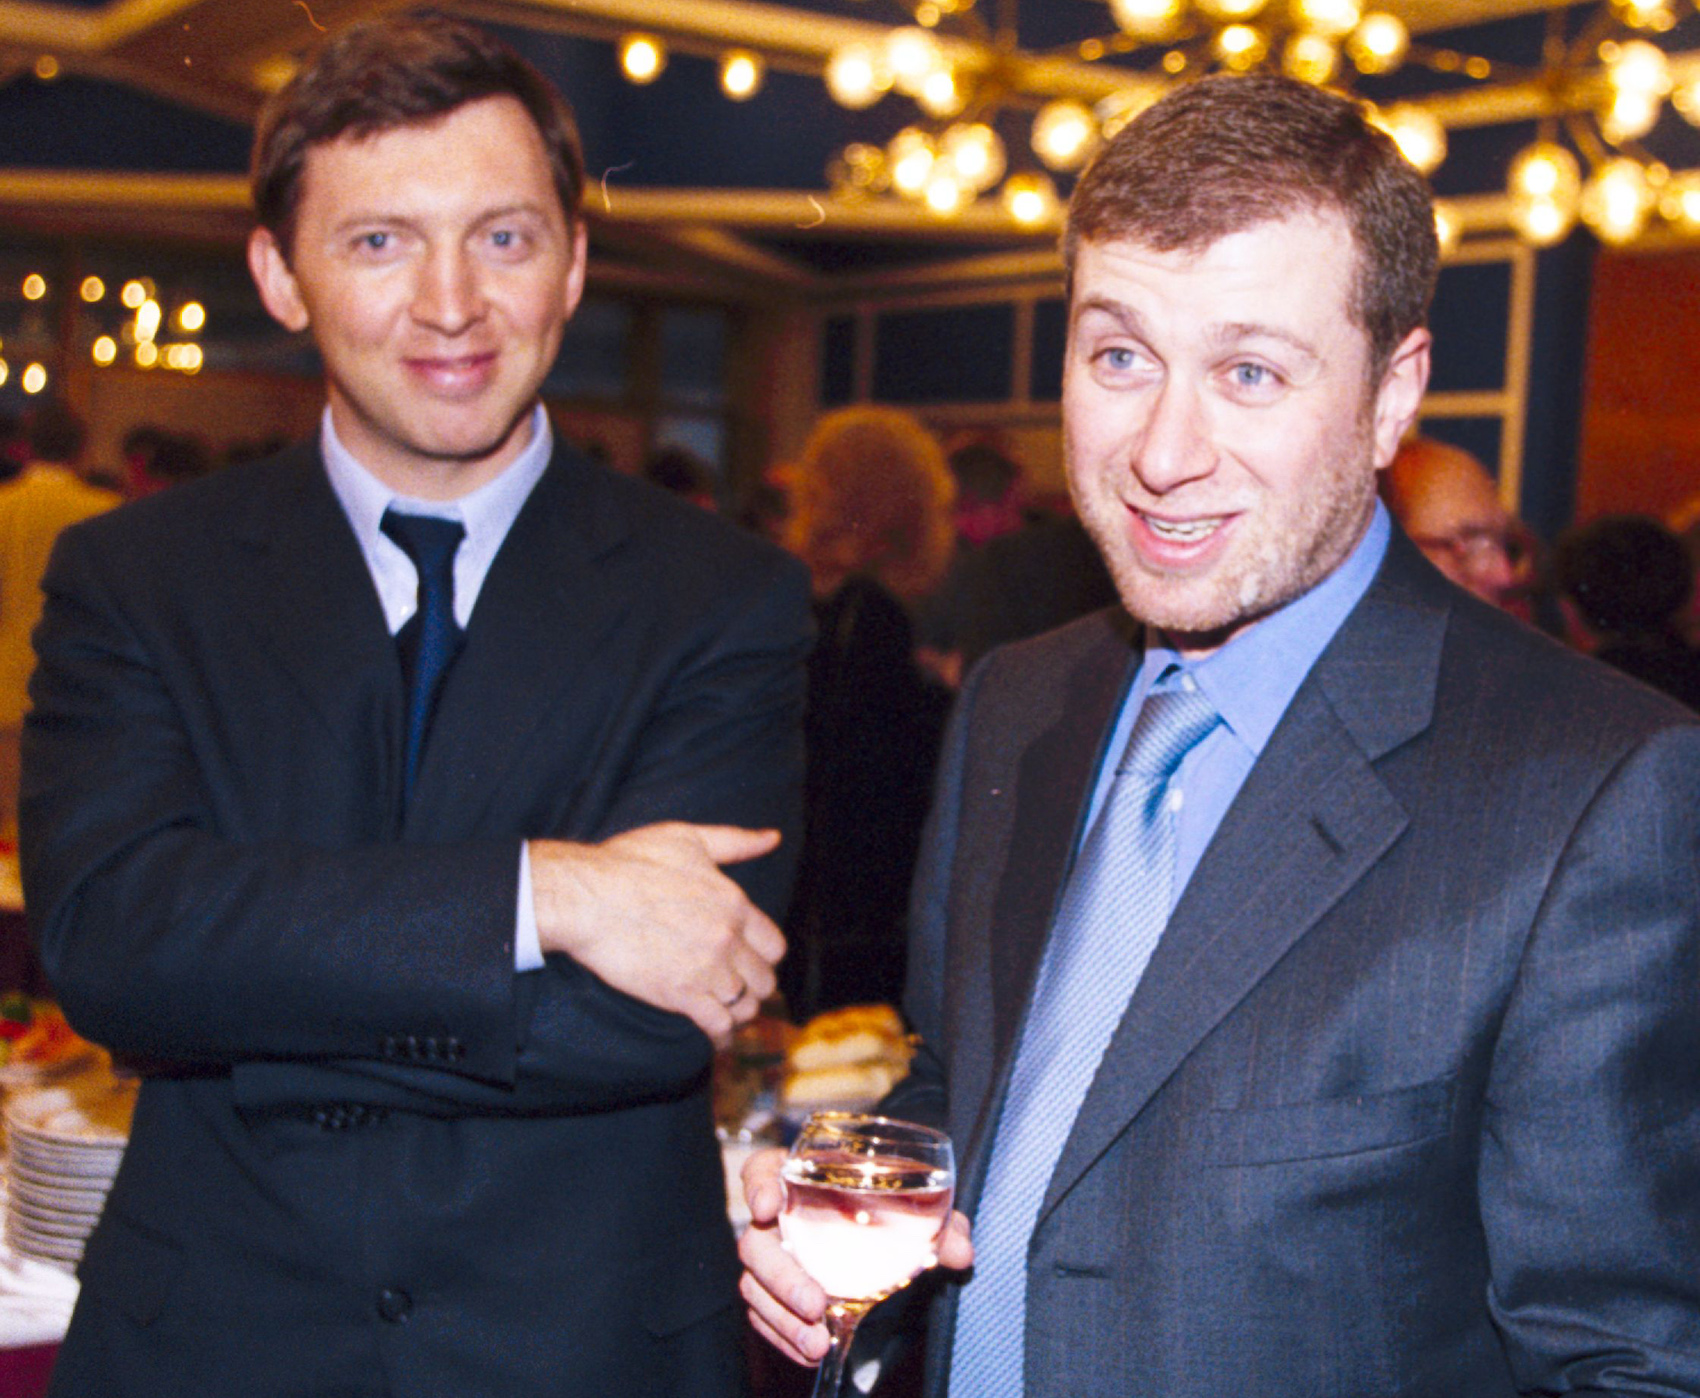 deripaska abramovich - MOSCOW, RUSSIA - MAR 29: Russian oligarch Oleg Deripaska, left, and Roman Abramovich, attend a meeting between Russian president Vladimir Putin and Russian businessmen in the Kremlin on Wednesday, March 29, 2006.